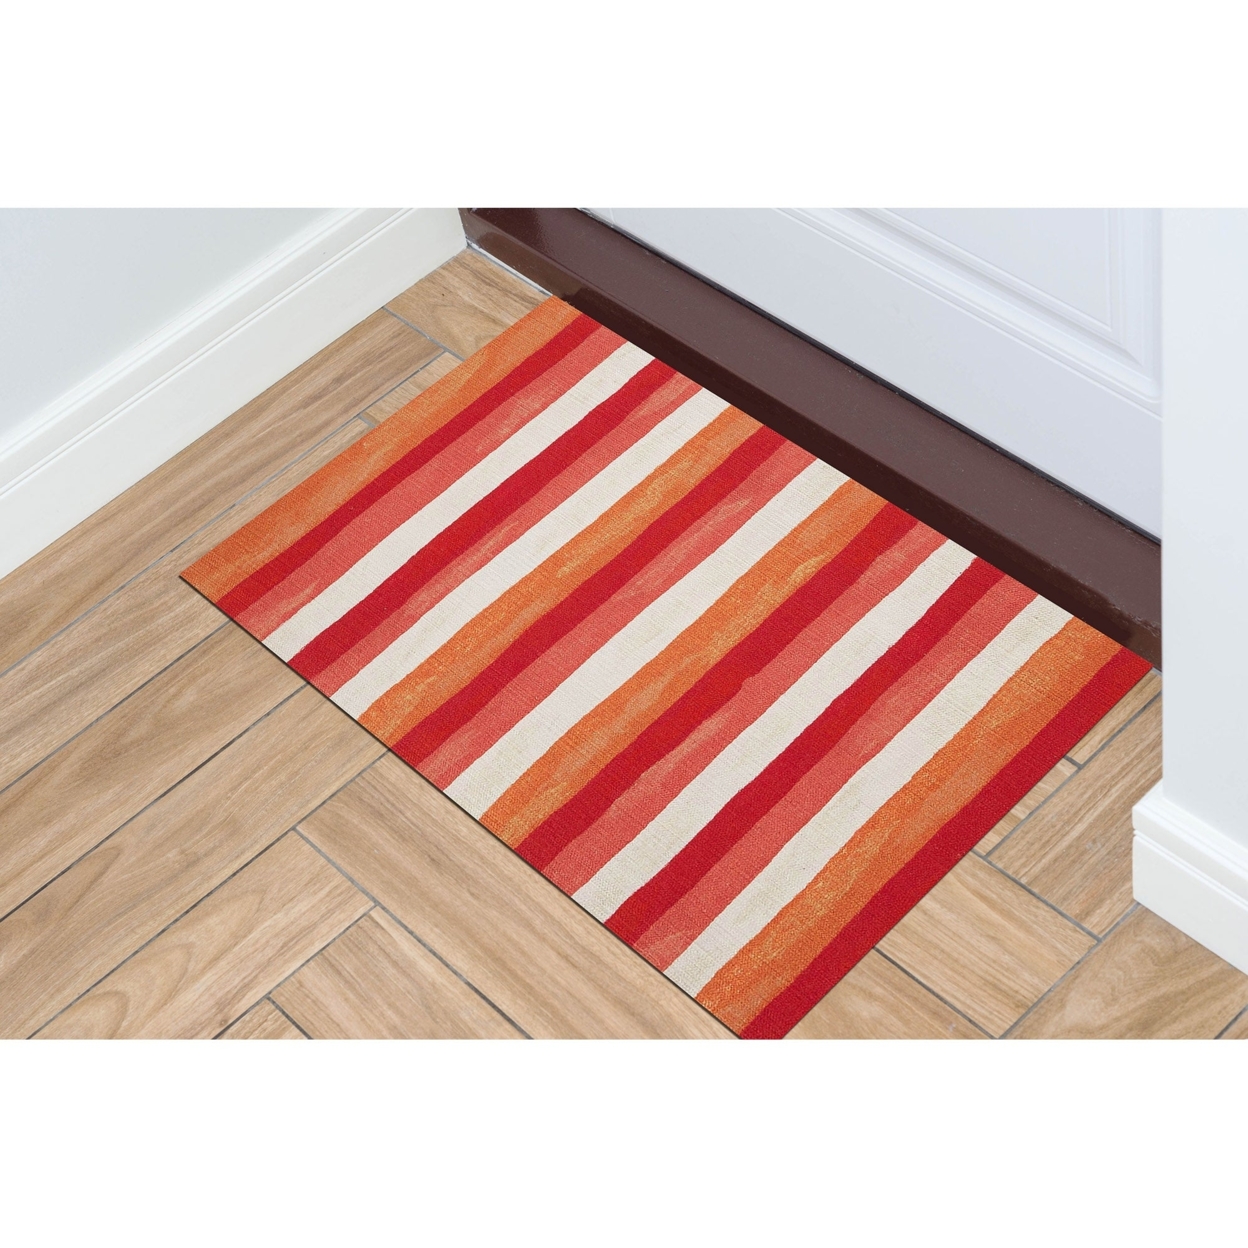 Liora Manne Visions II Painted Stripes Indoor Outdoor Area Rug Warm - 8' X 10'